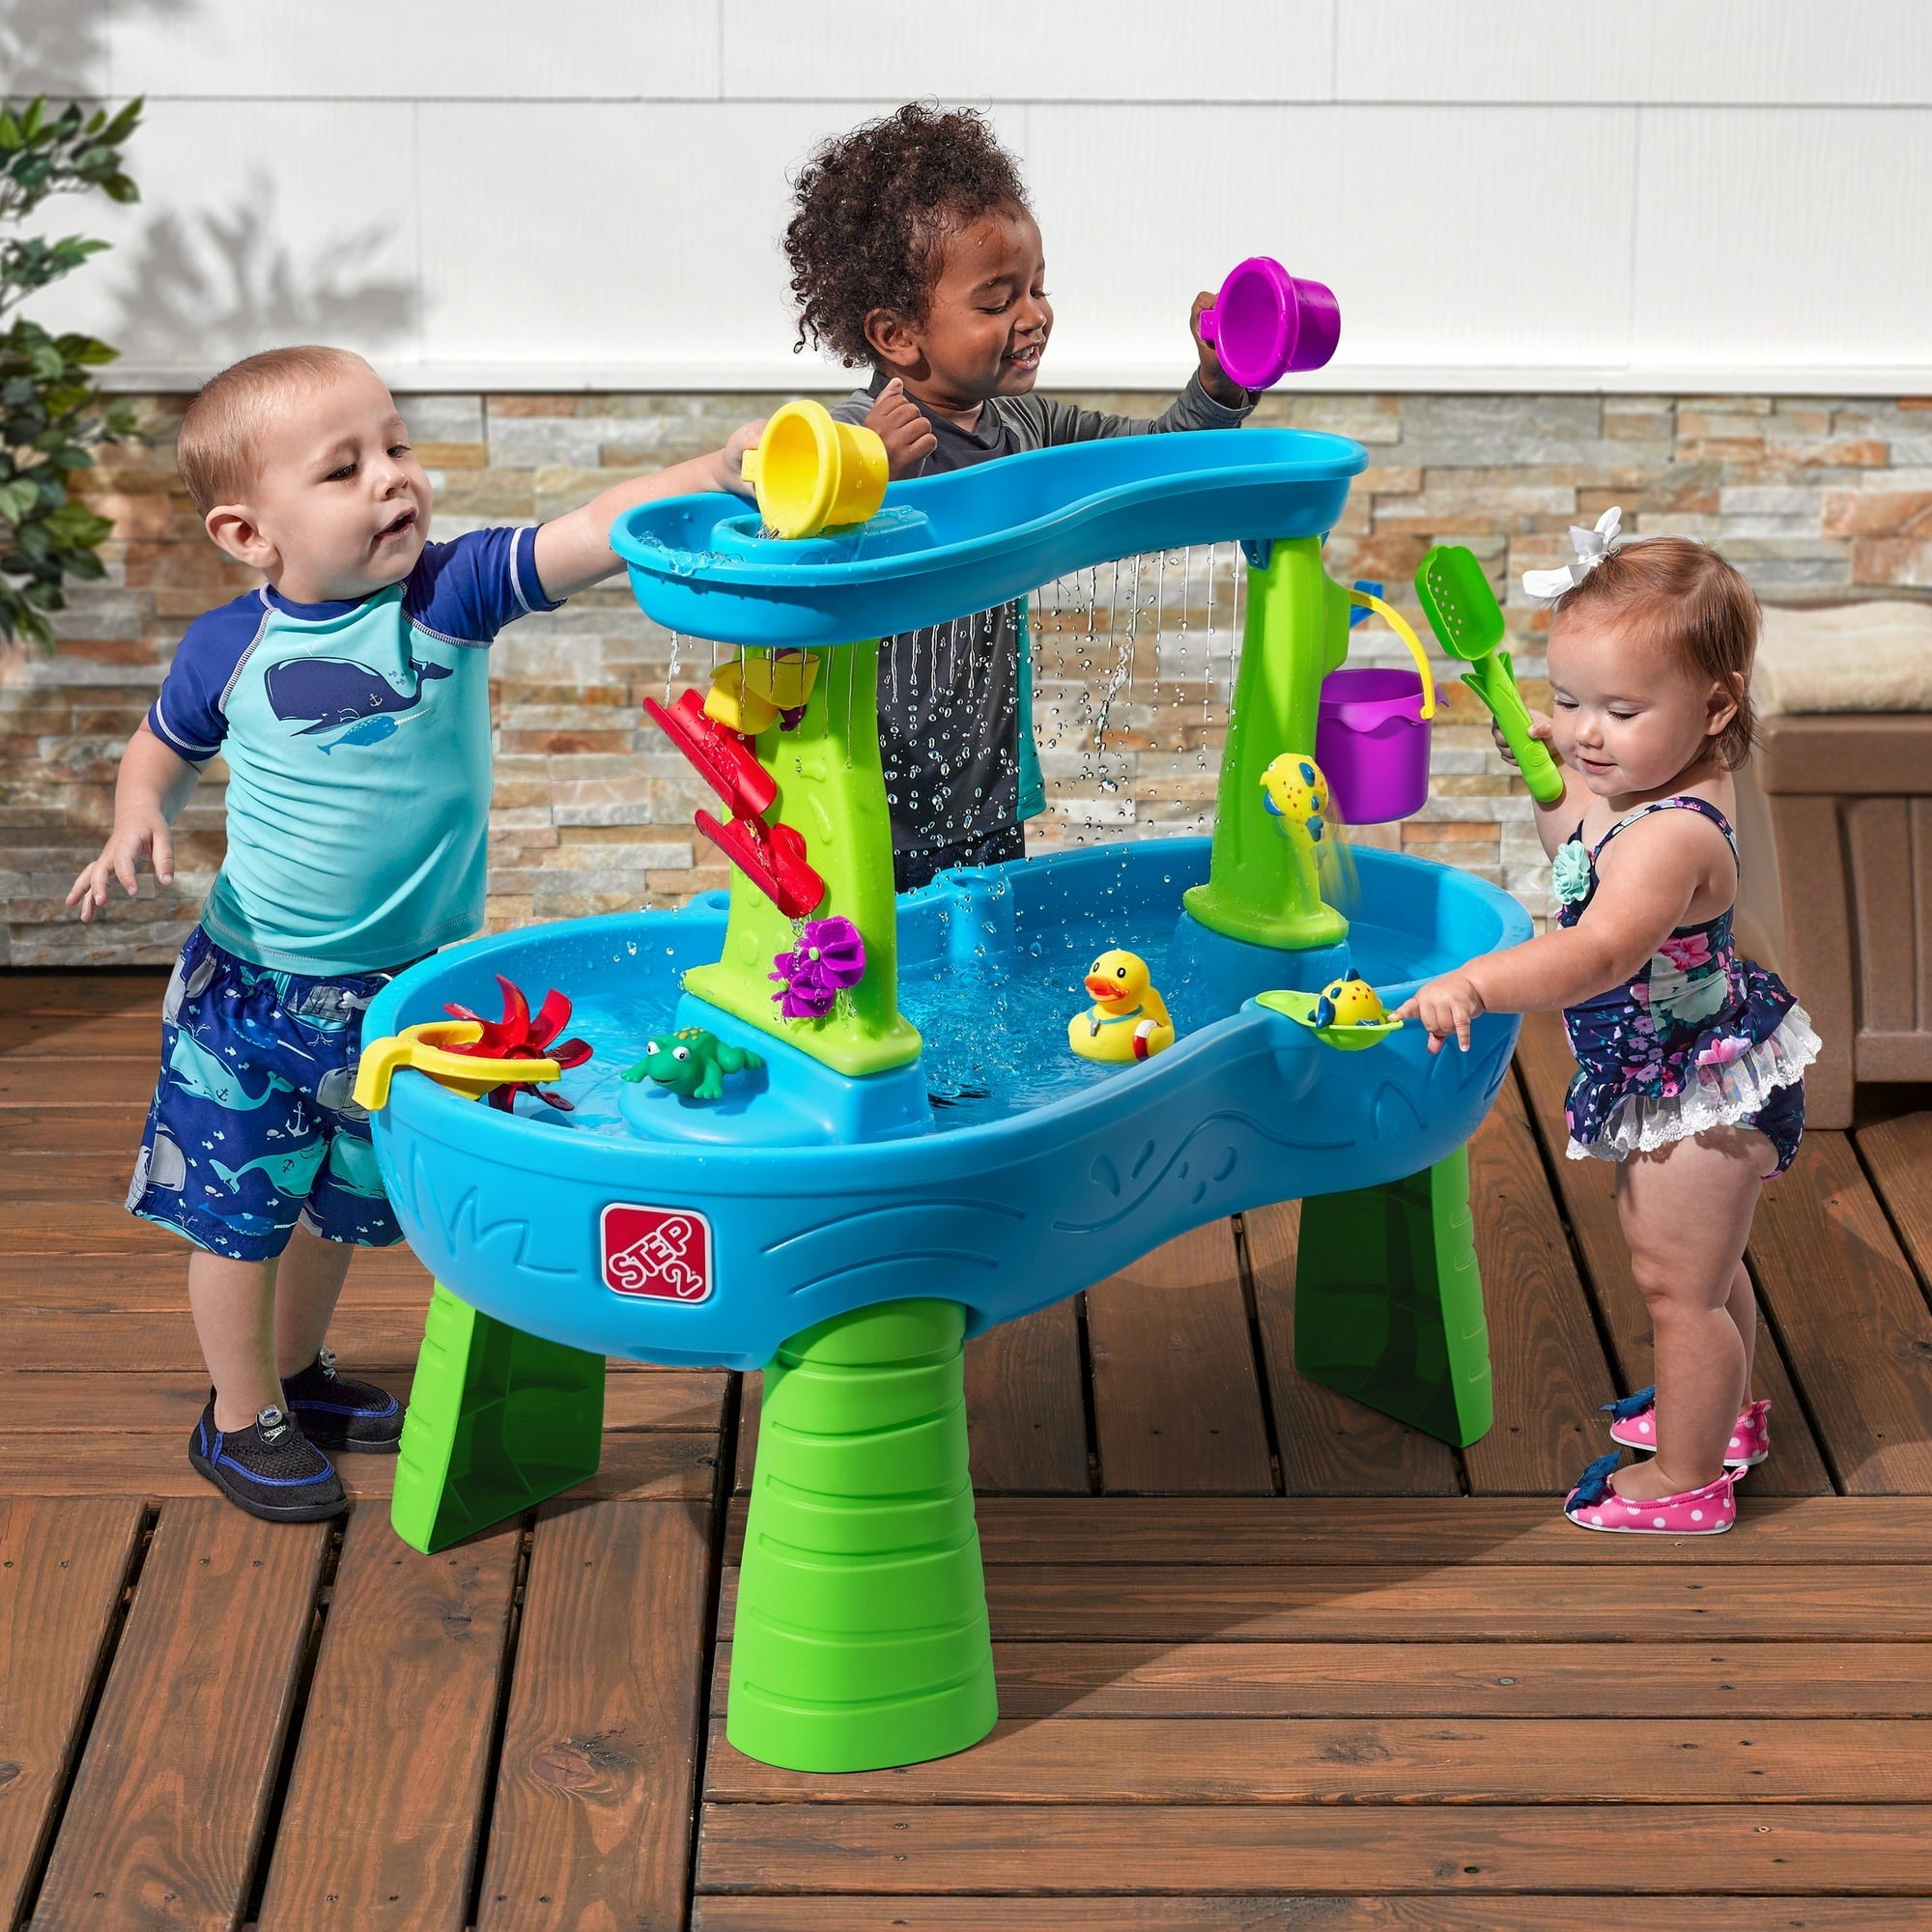 Kids play with a water table